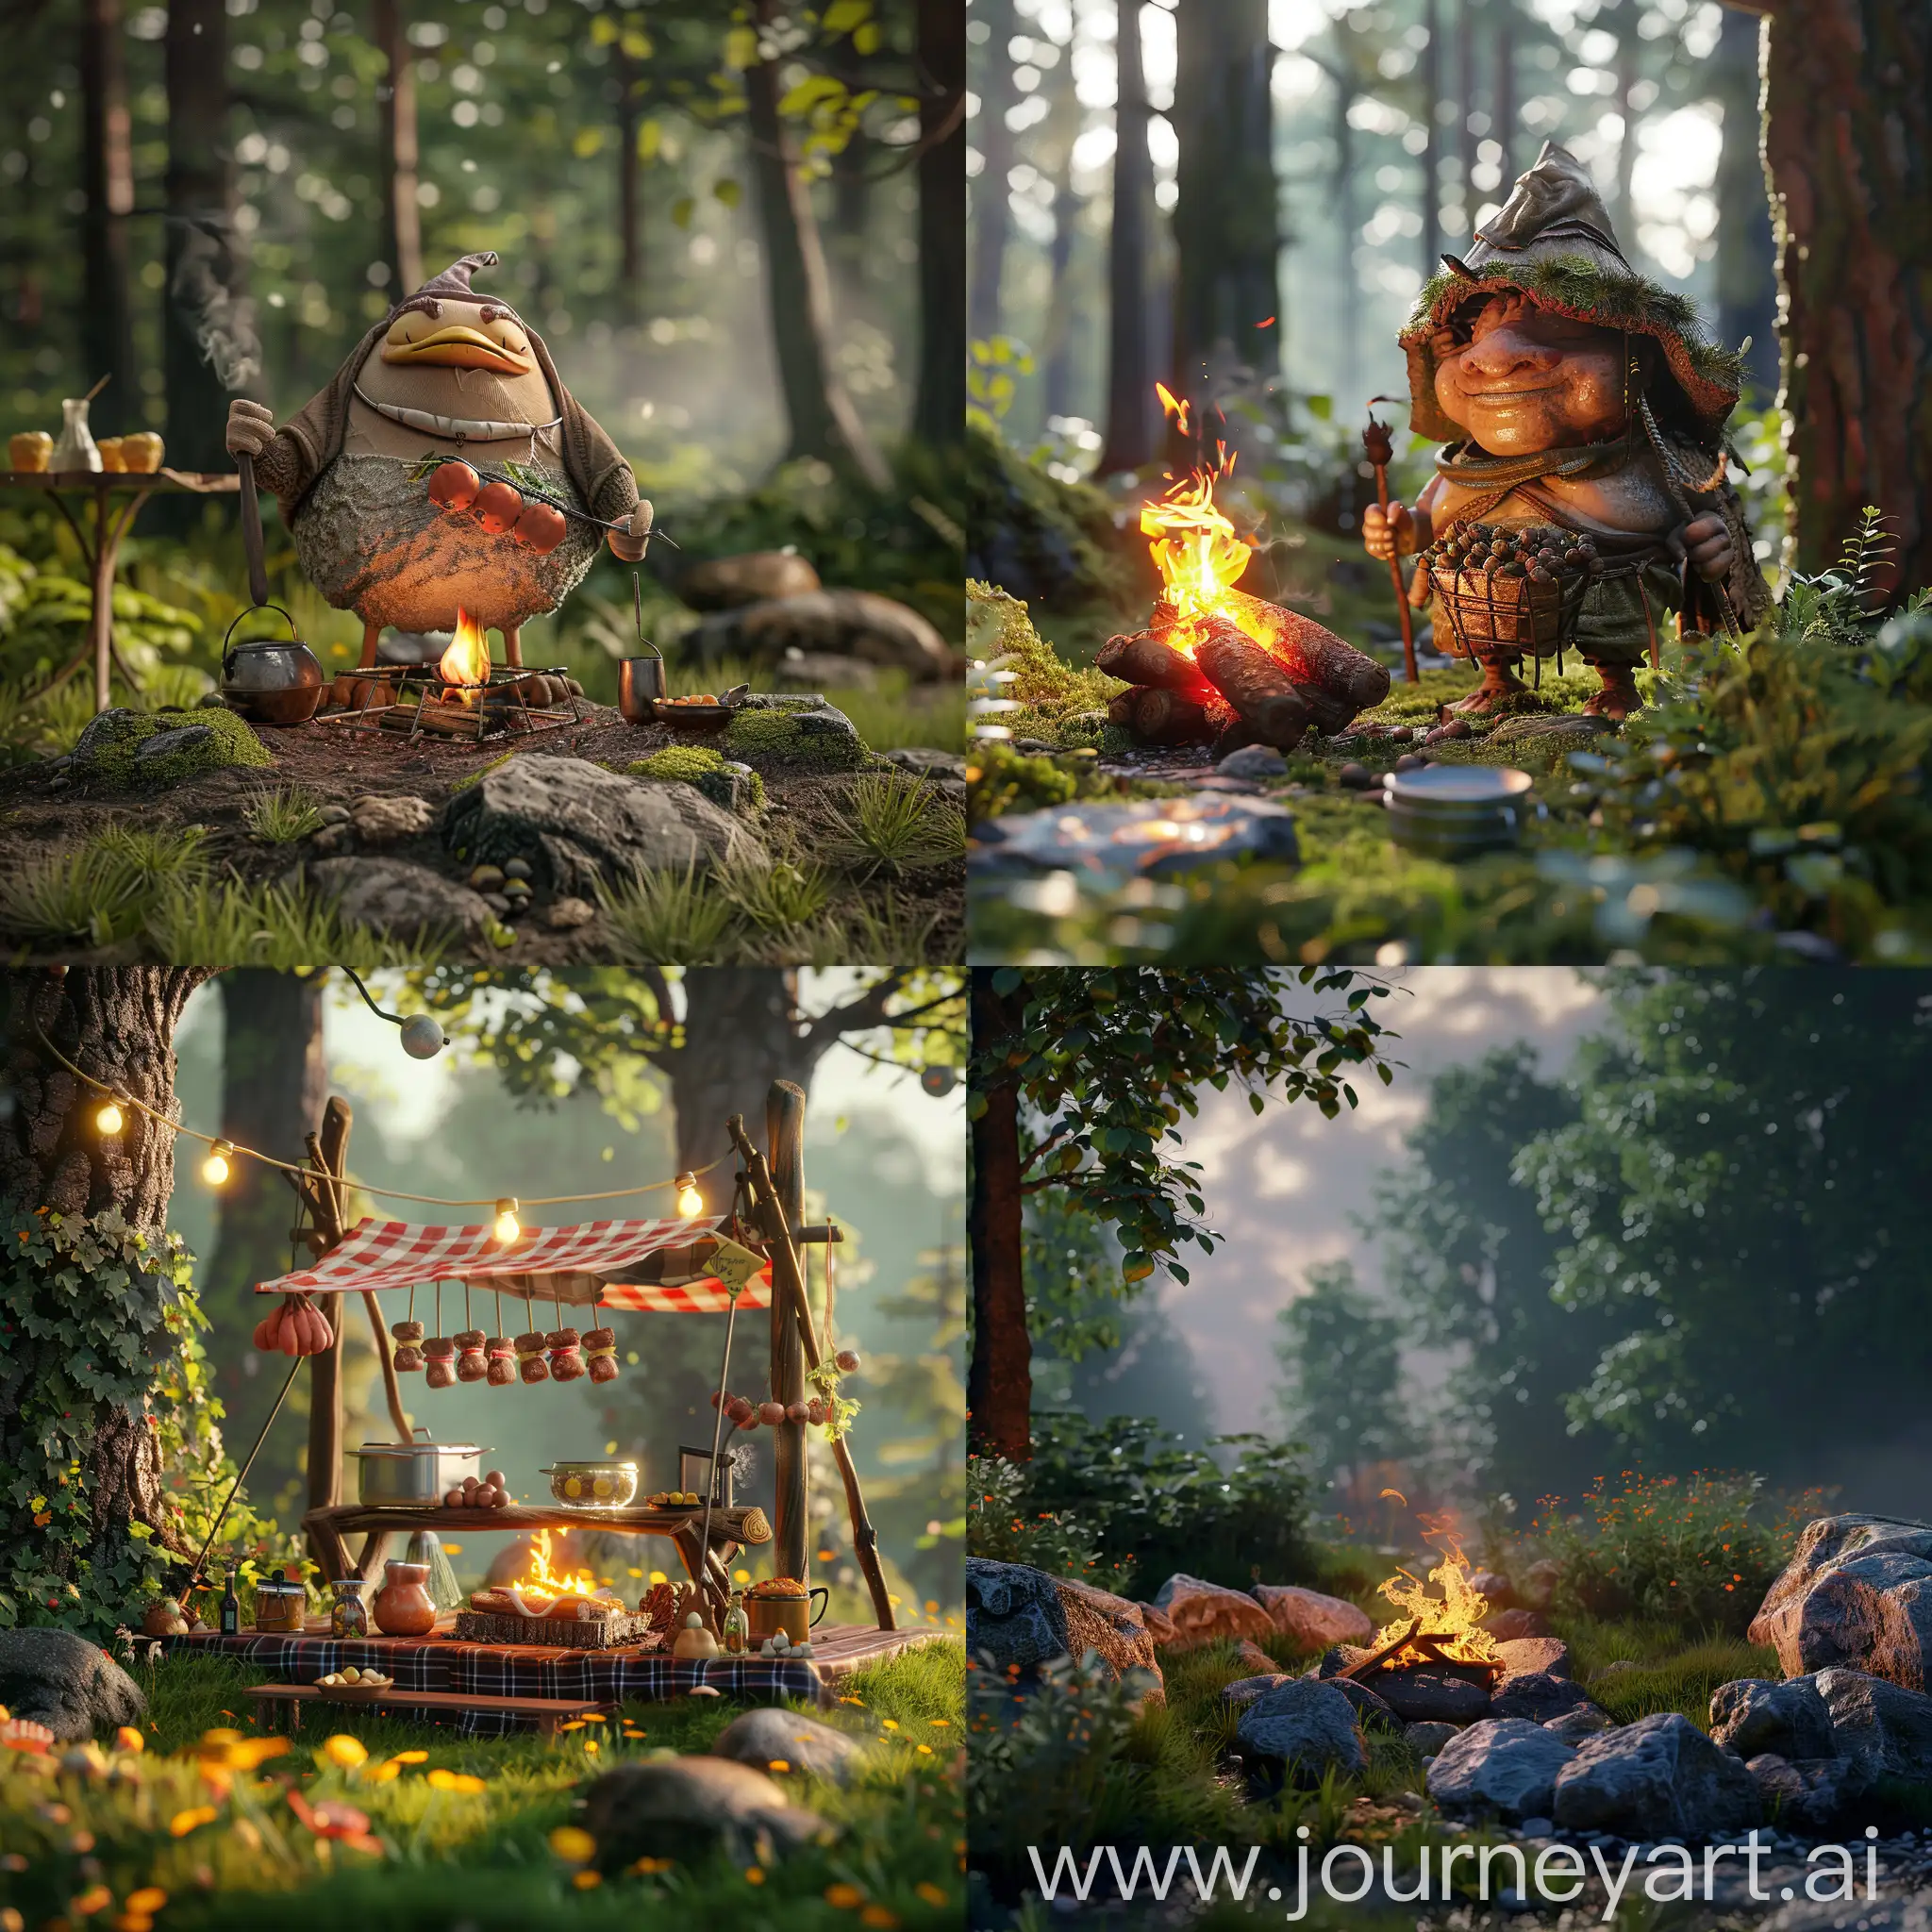 Forest-Kebab-Brazier-3D-Animated-Grilling-Experience